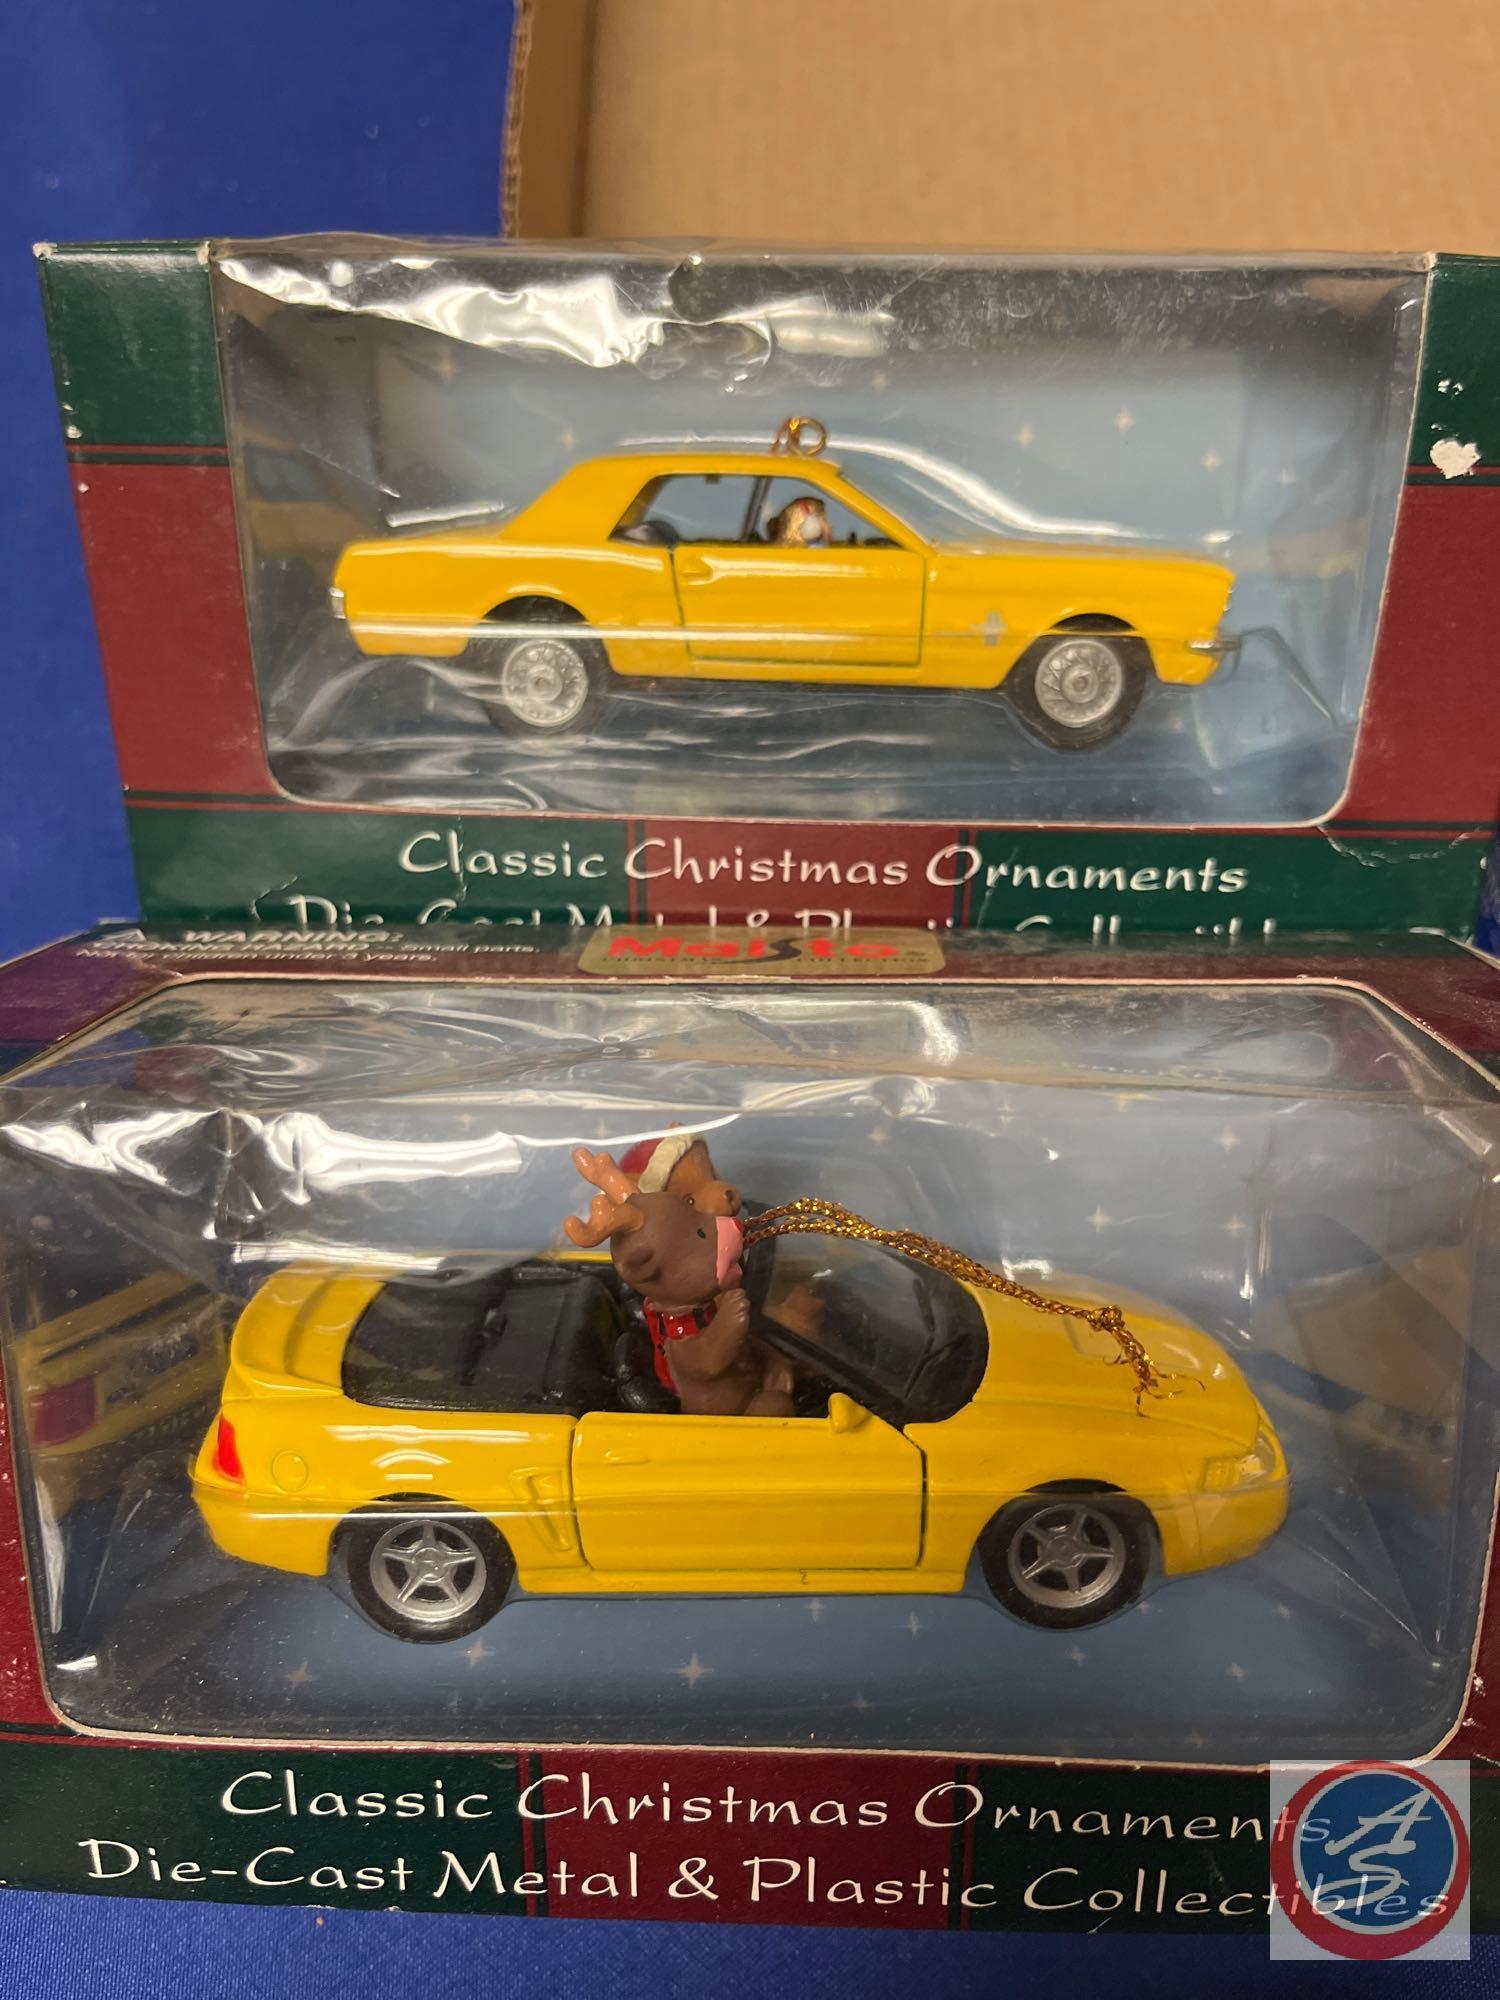 Classic Christmas Ornaments Die Cast Metal & Plastic Collectibles, Road Track Power Racers - Die